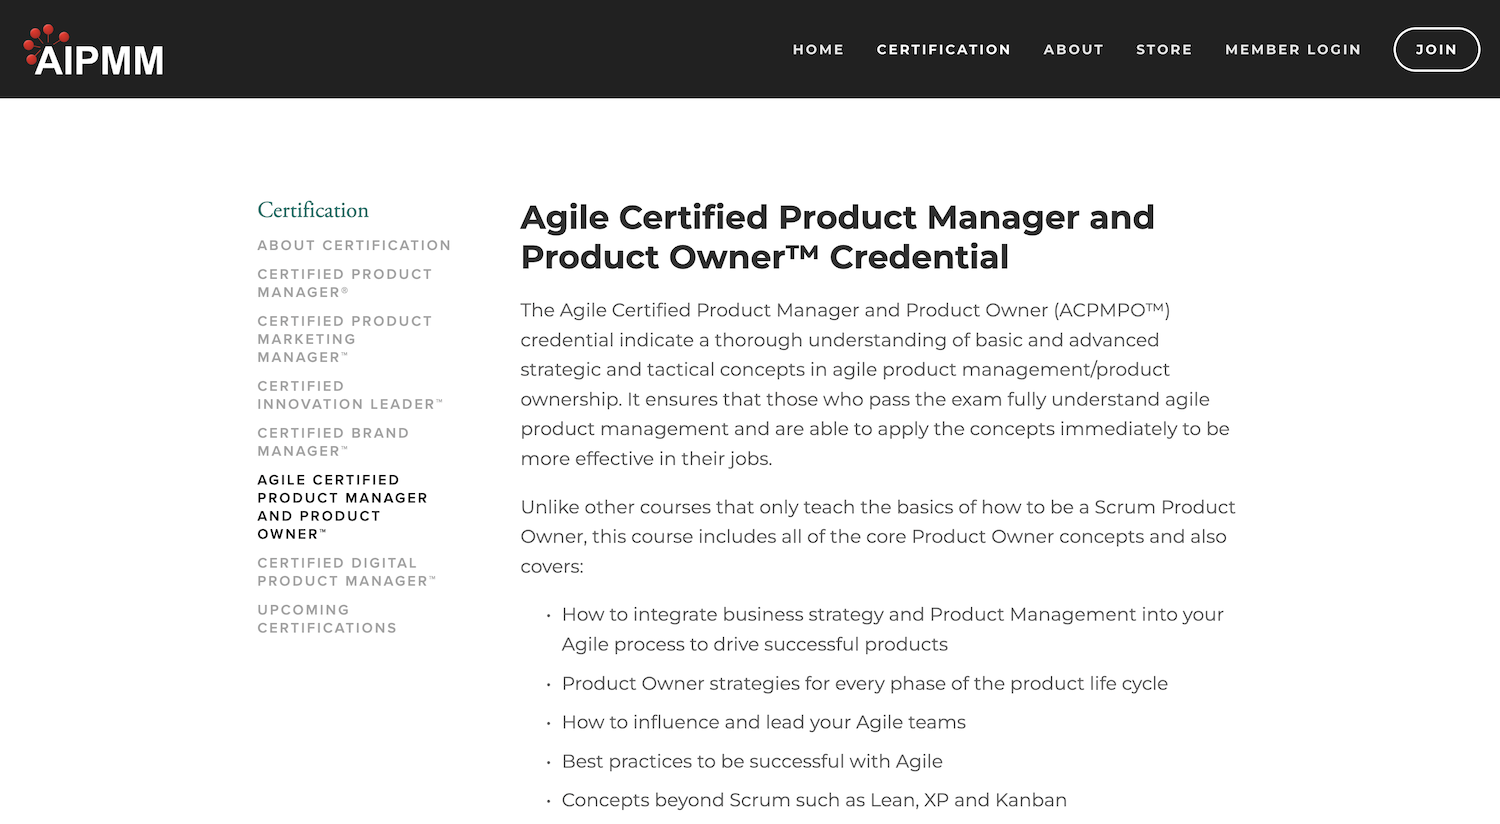 AIPMM Agile Certified Product Manager and Product Owner Credential